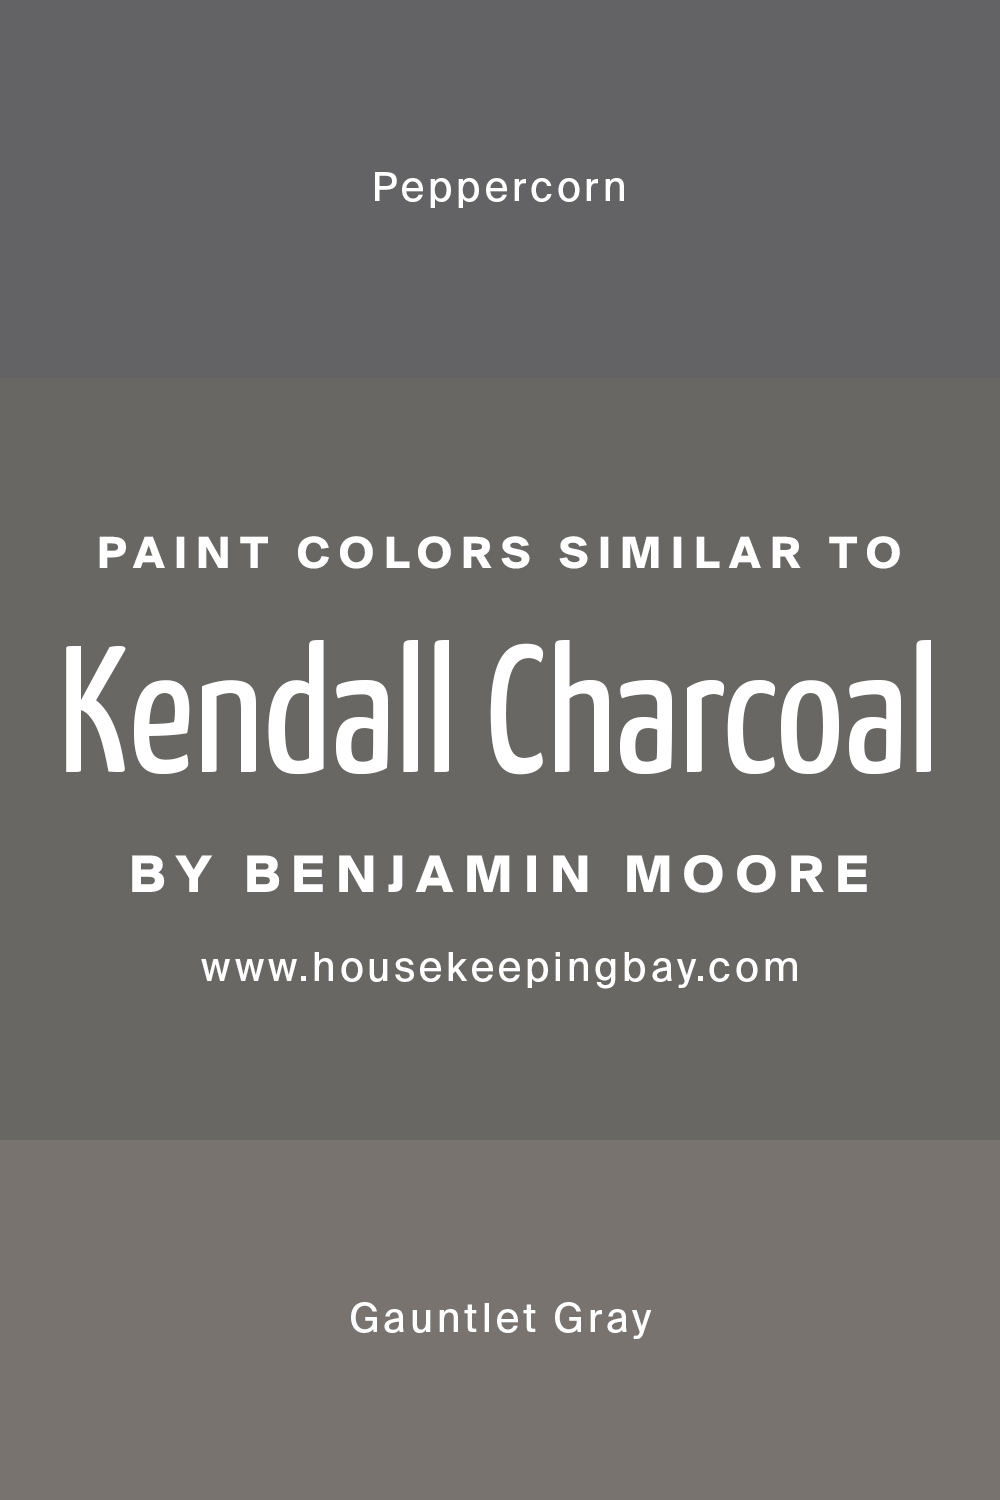 Paint Colors Similar to Kendall Charcoal